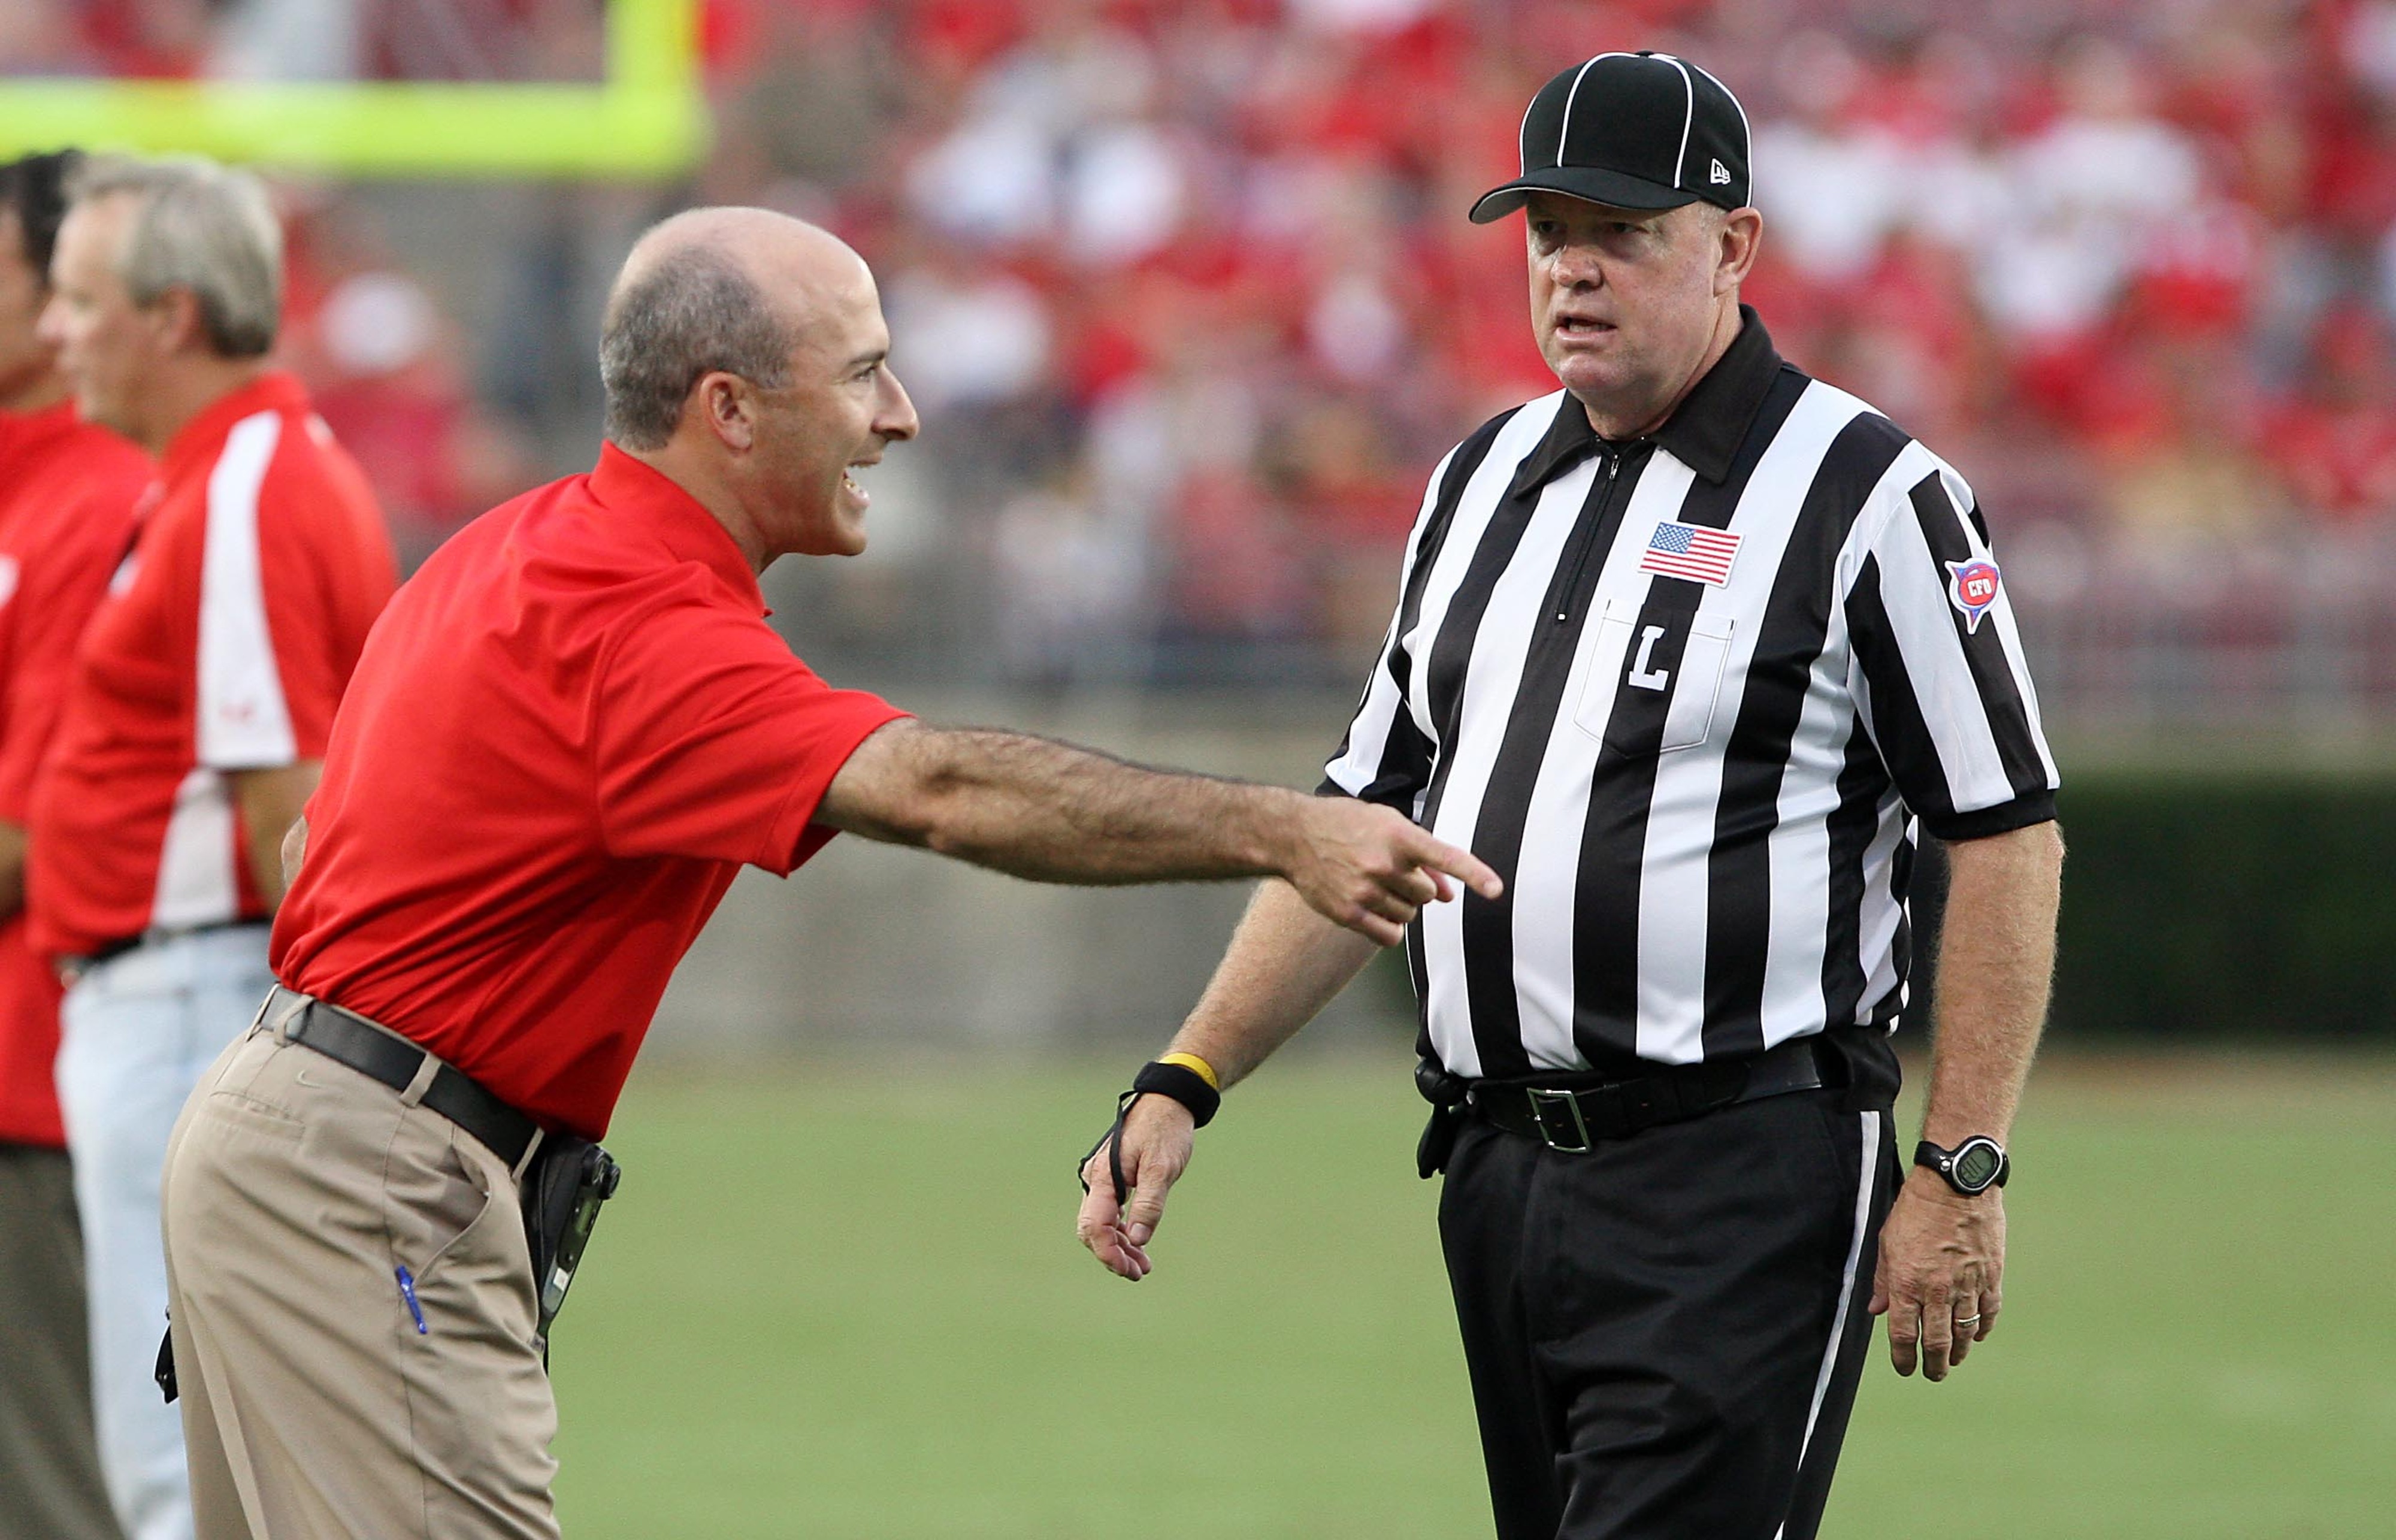 September 08, 2012; Houston, TX, USA; Houston Cougars head coach Tony Levine discusses a call with a referee in the first quarter against the Louisiana Tech Bulldogs at Robertson Stadium. Mandatory Credit: Troy Taormina-US PRESSWIRE